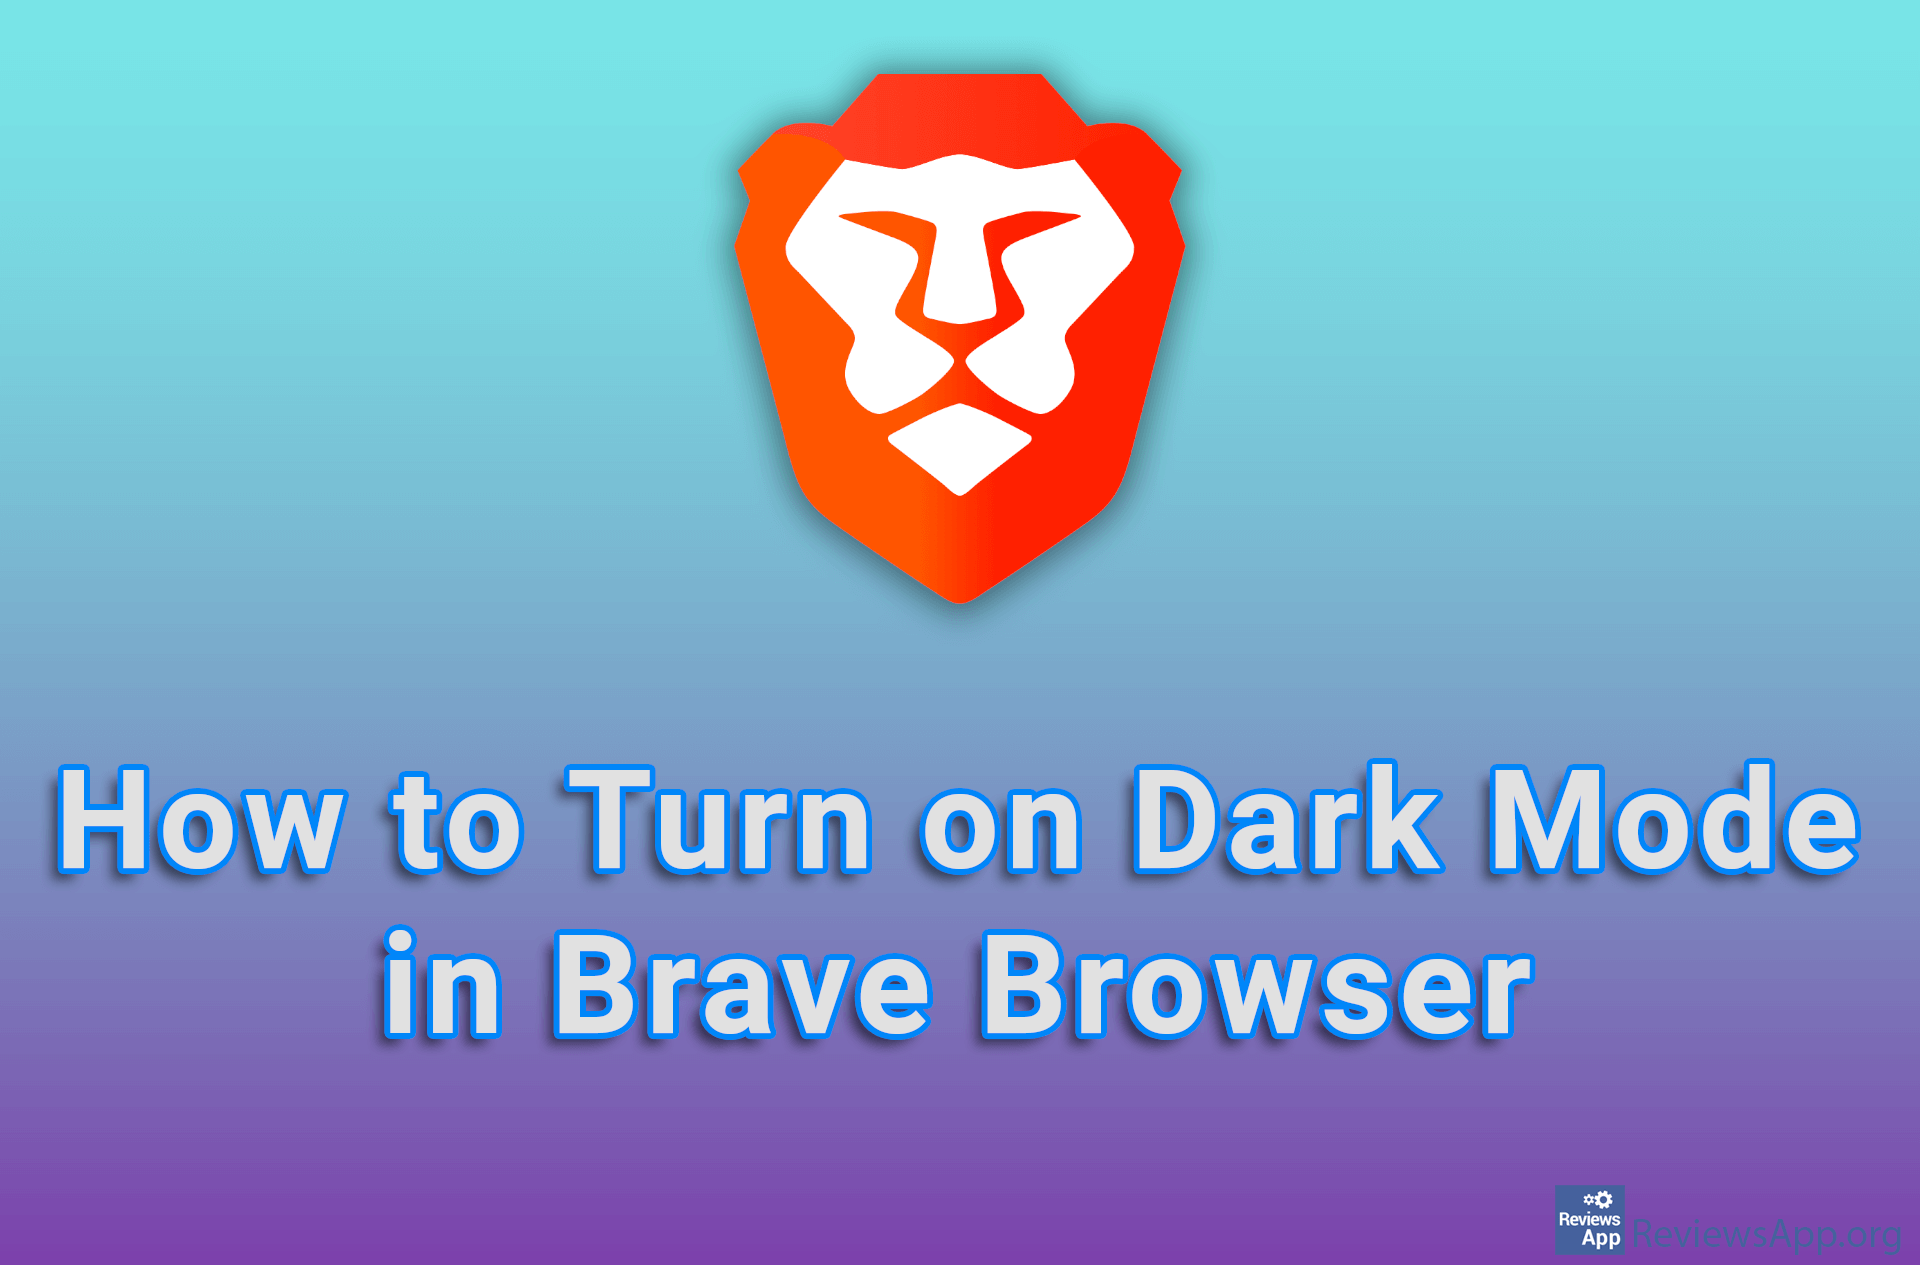 How to Turn on Dark Mode in Brave Browser